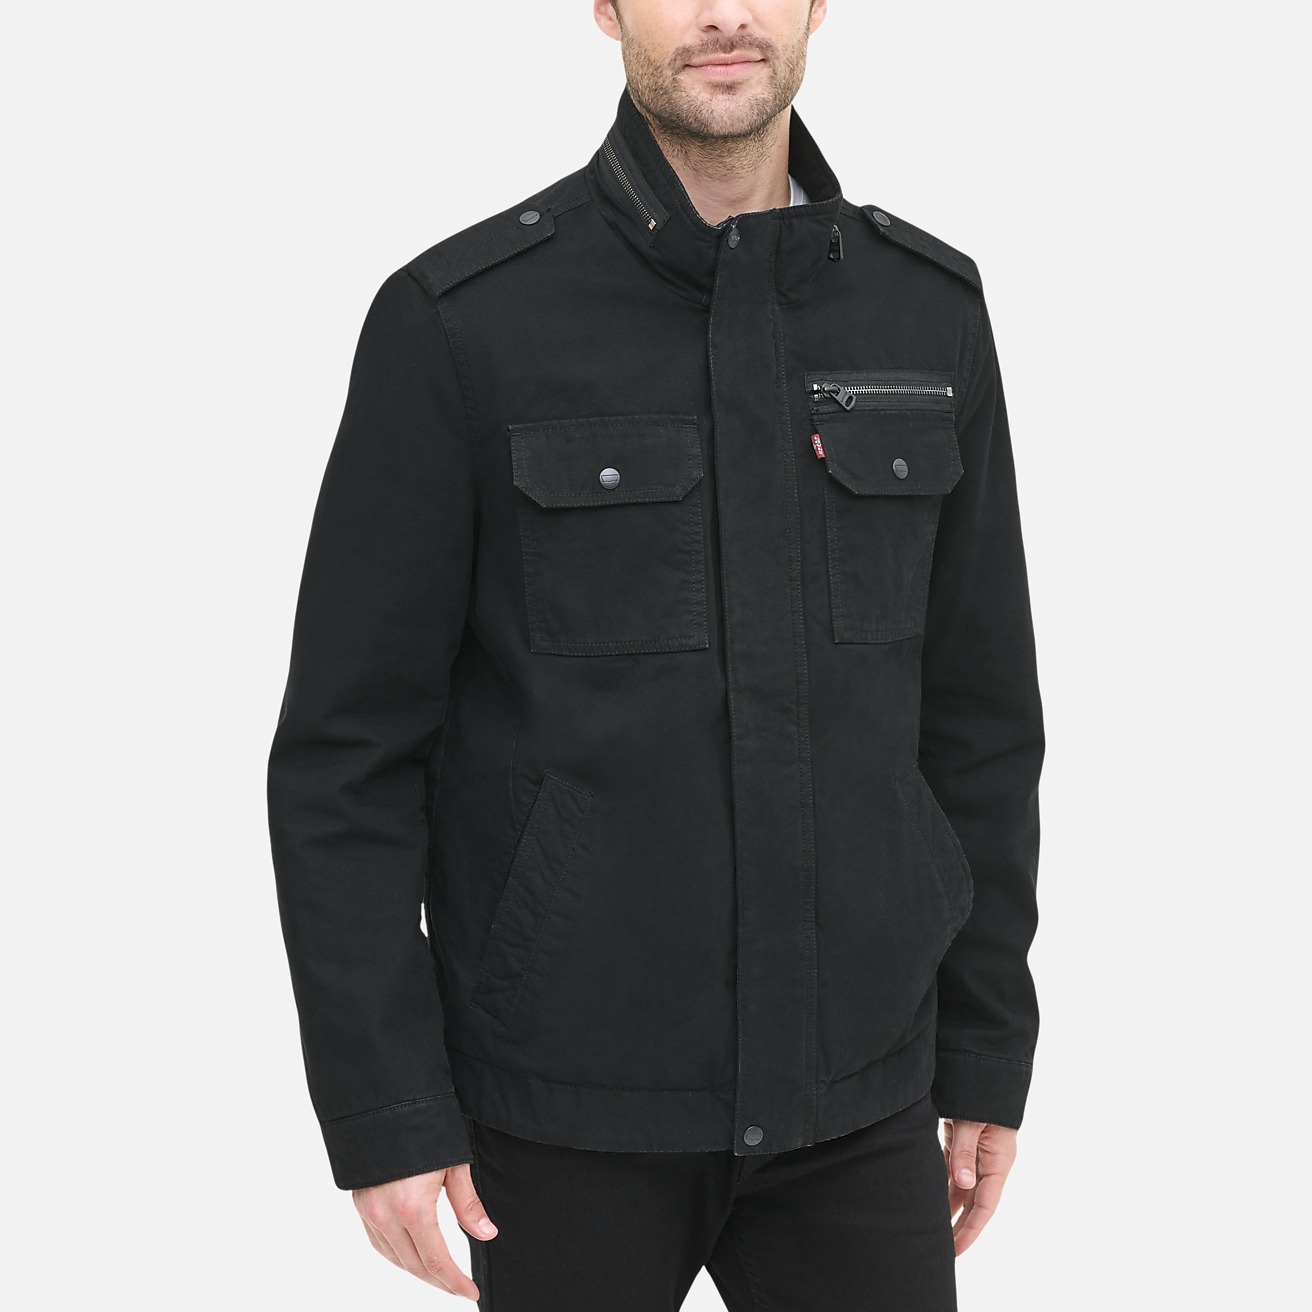 https://image.menswearhouse.com/is/image/TMW/TMW_71RW_02_LEVIS_CASUAL_JACKETS_BLACK_MAIN?imPolicy=pdp-mob-2x